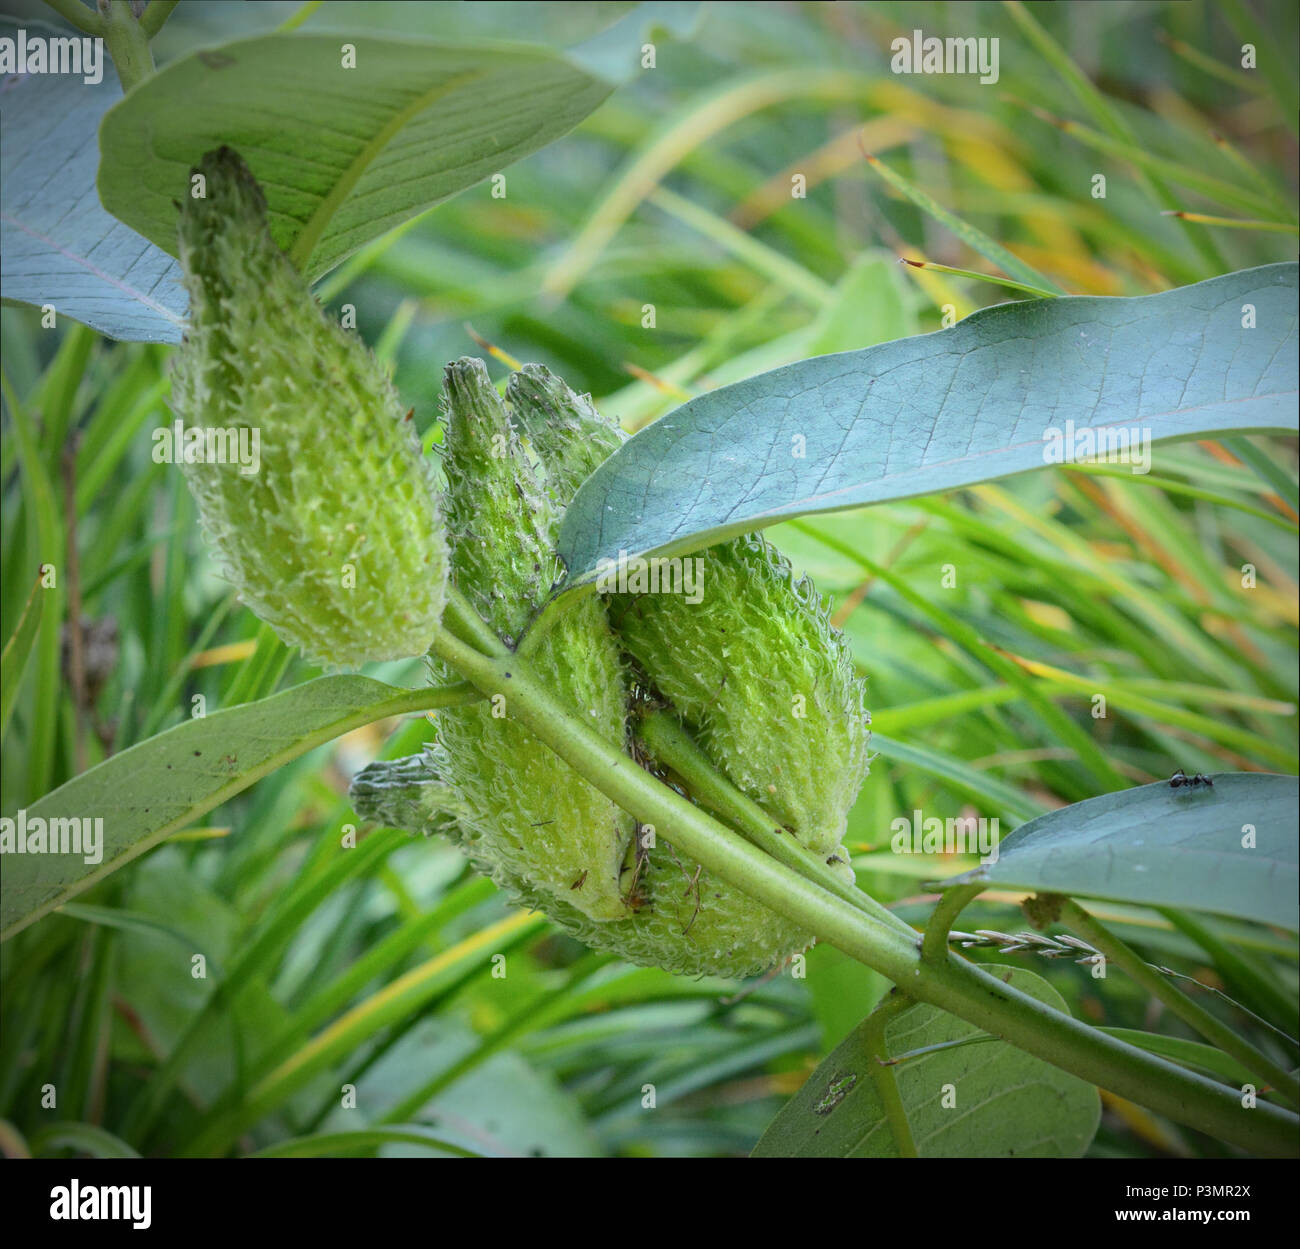 Close up photo of immature green milkweed seed pods. Stock Photo